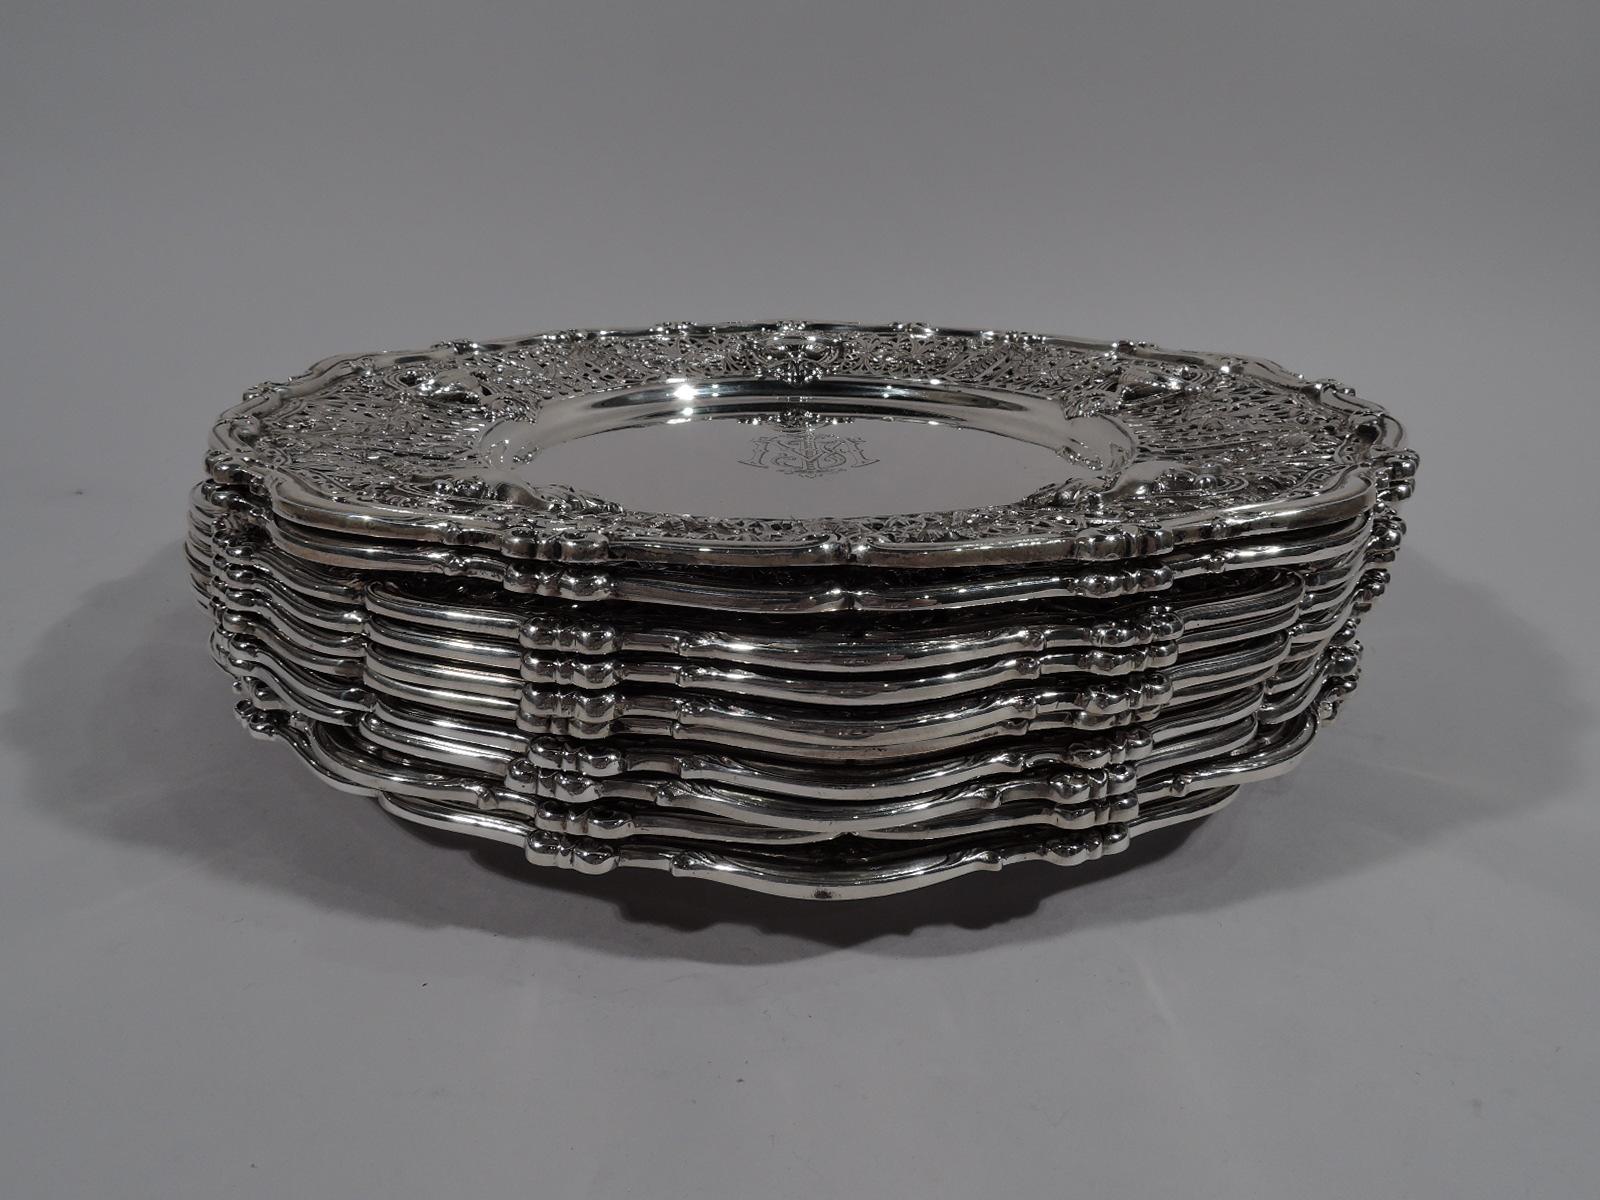 Set of 10 Edwardian Regency sterling silver dinner plates in Adam pattern. Made by Shreve & Co. in San Francisco, circa 1915. Round solid well. Wide shoulder with classical vases on open rondels joined by leaf swag on pierced fern ground. Scrolled